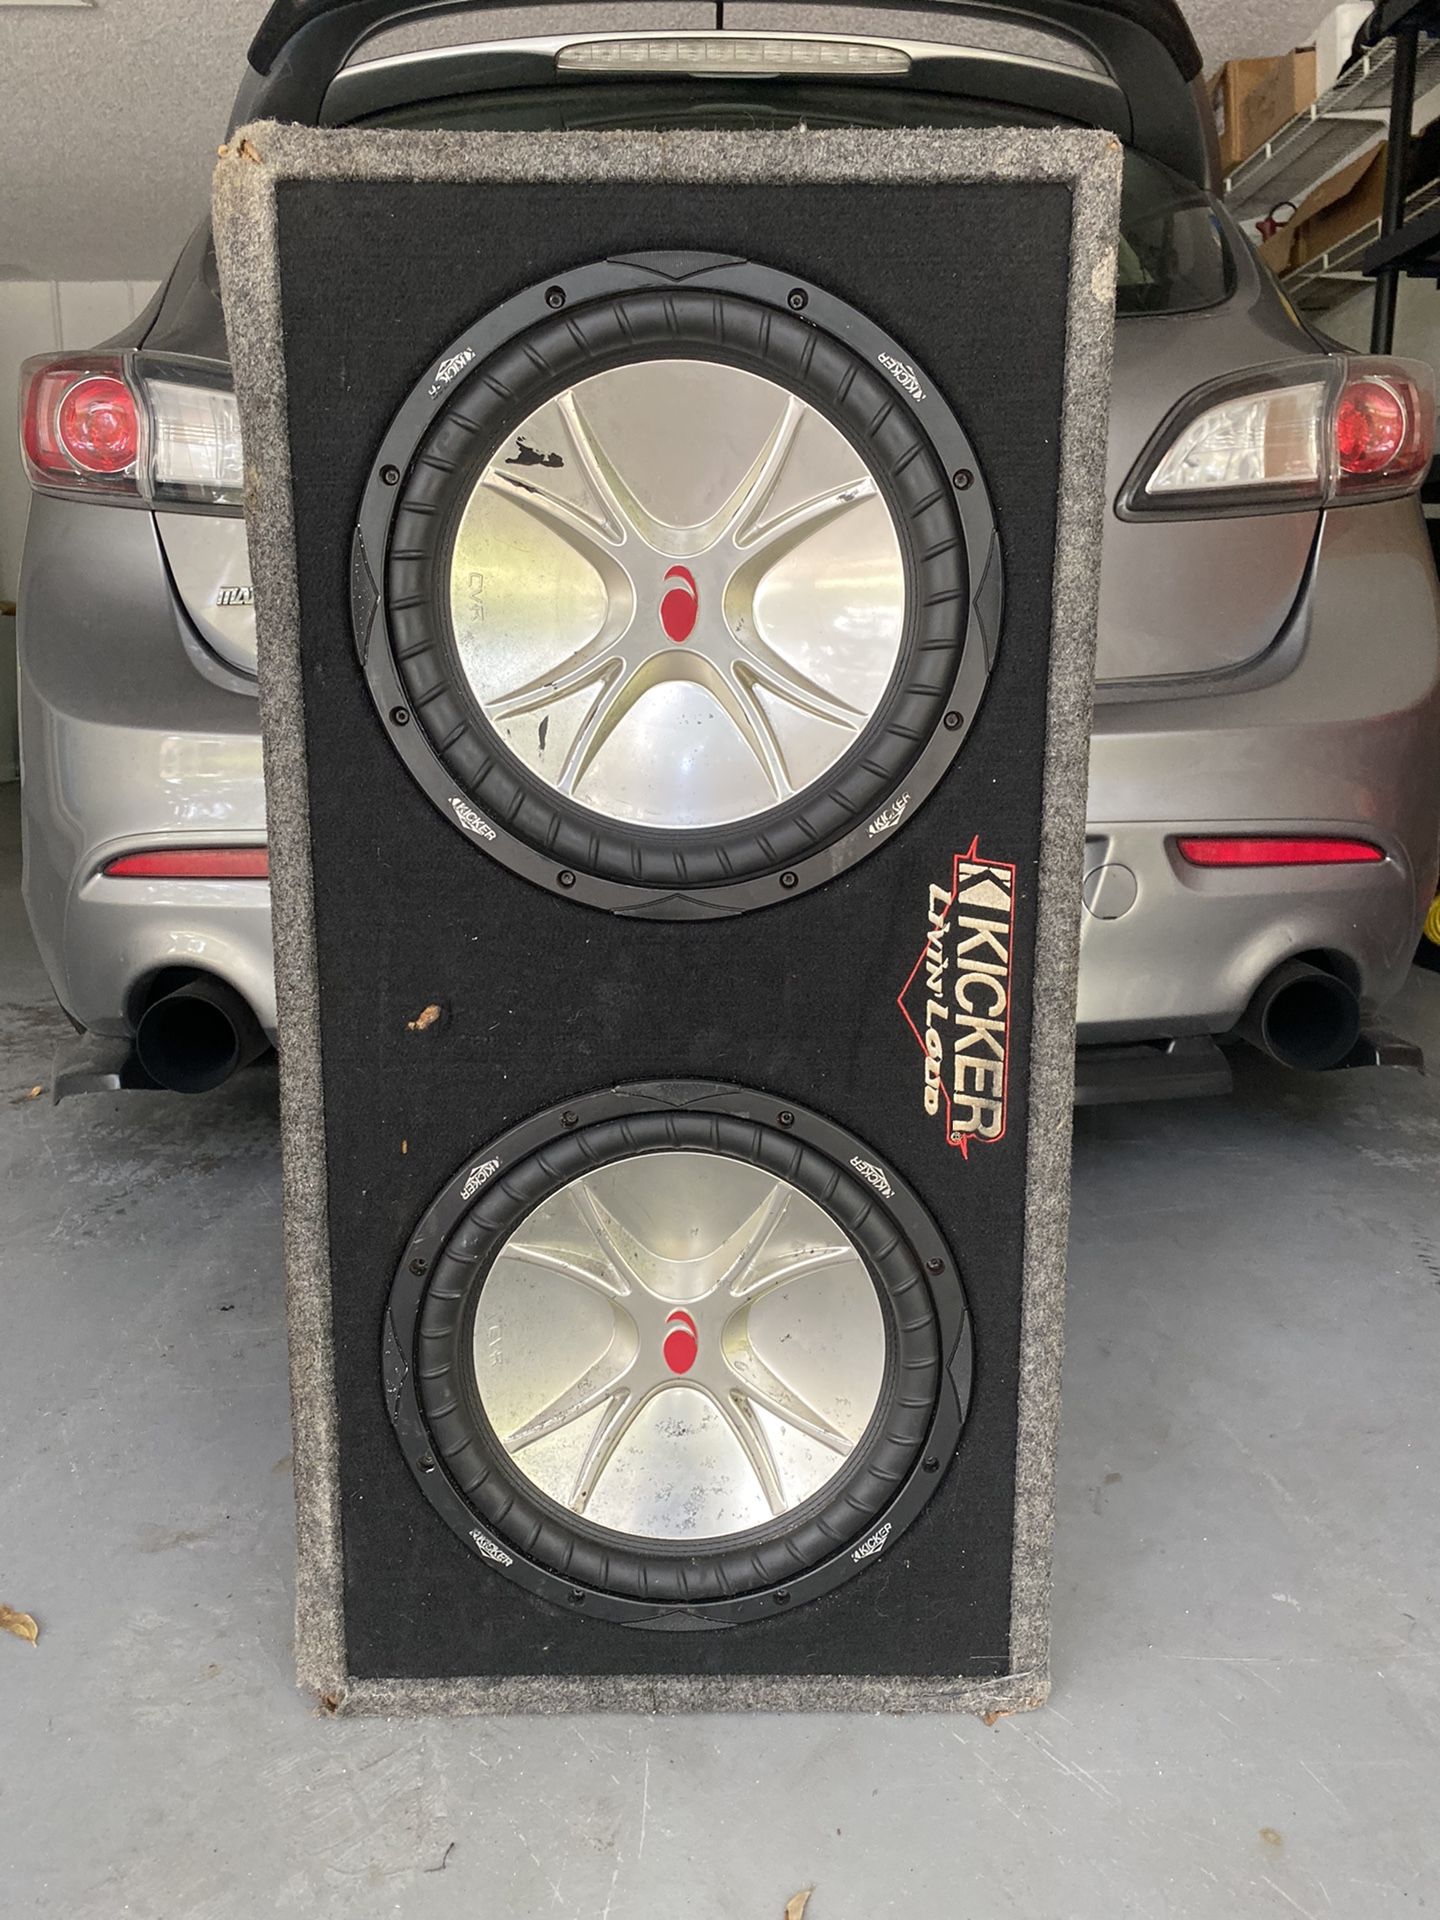 2 12” Kicker Subwoofer with amp